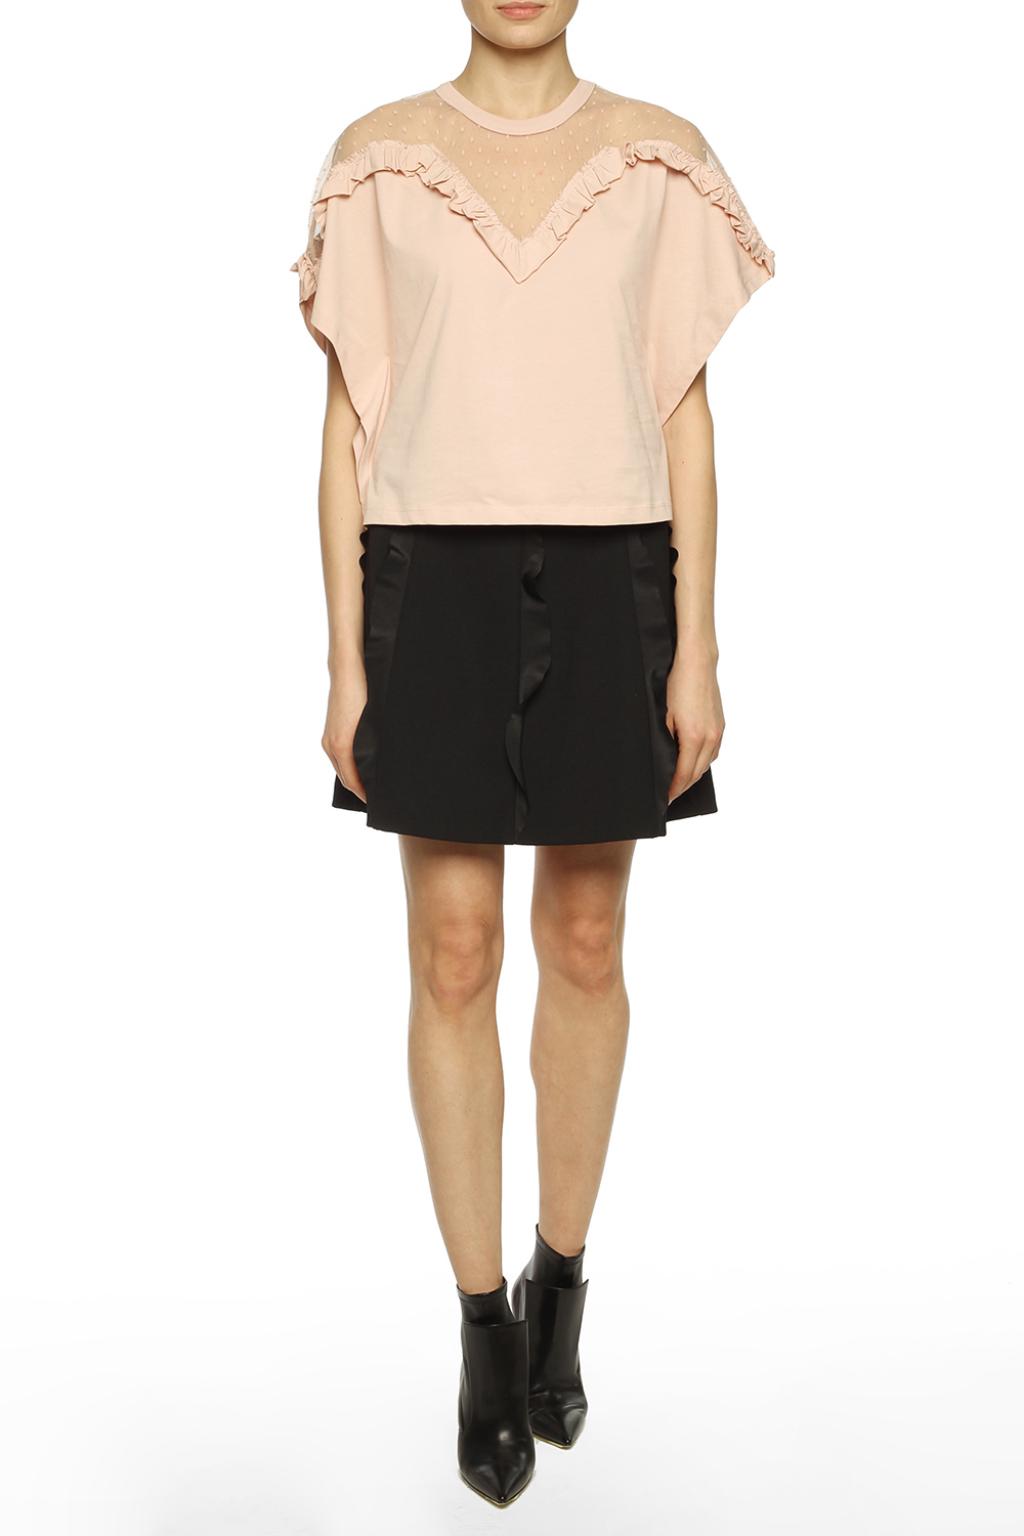 Red Valentino Oversize lace top | Women's Clothing | Vitkac